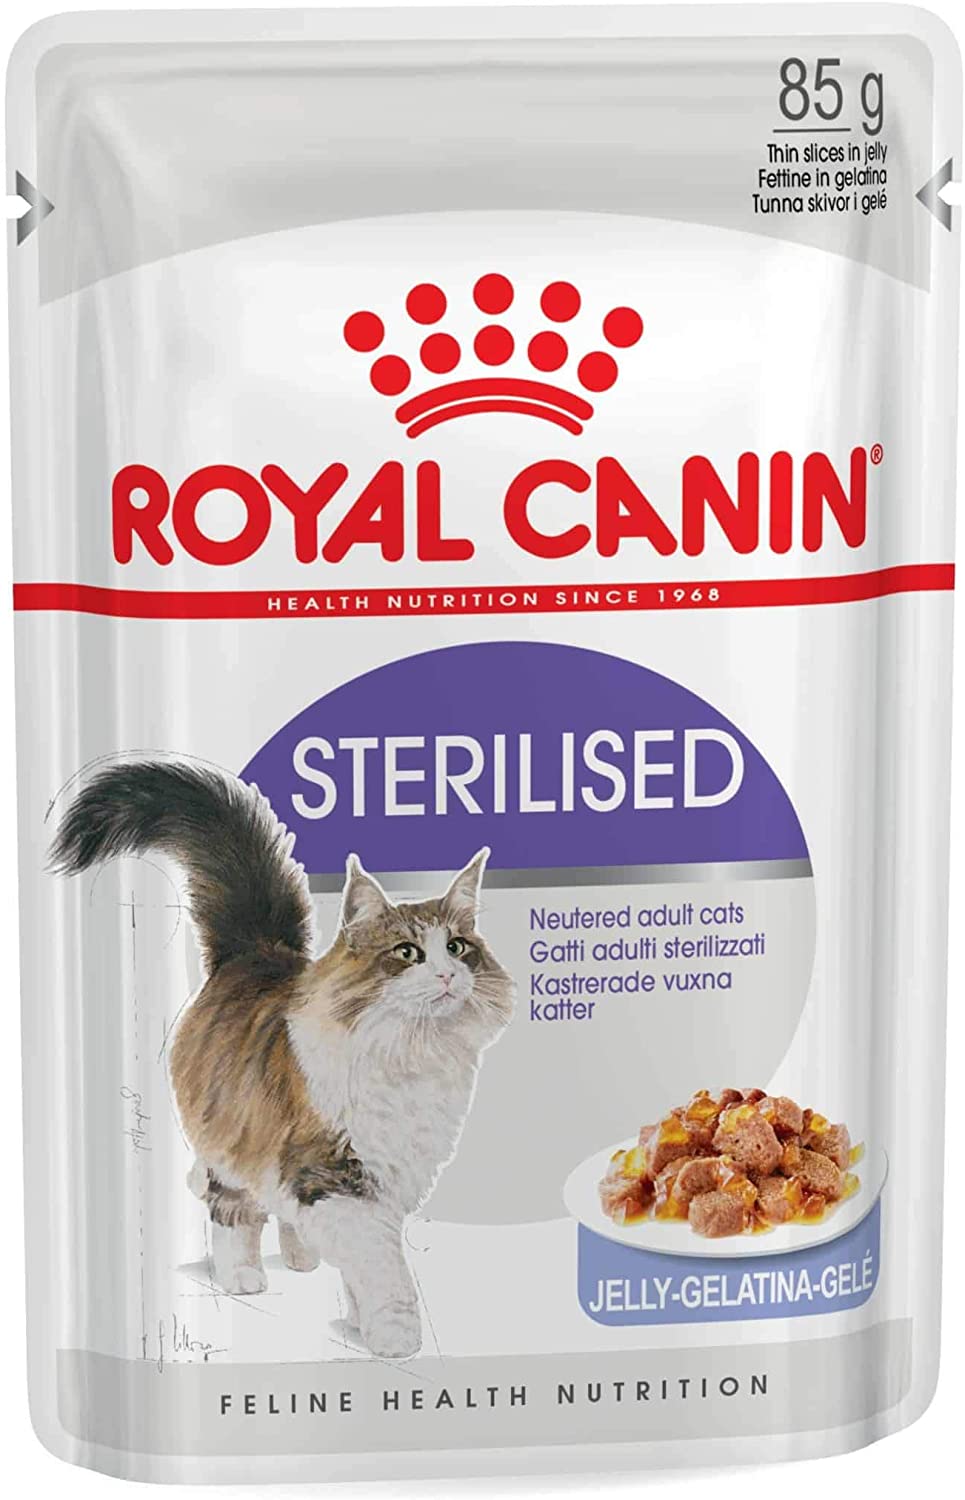 Royal Canin Sterilised Adult Cat Pouch - 85g